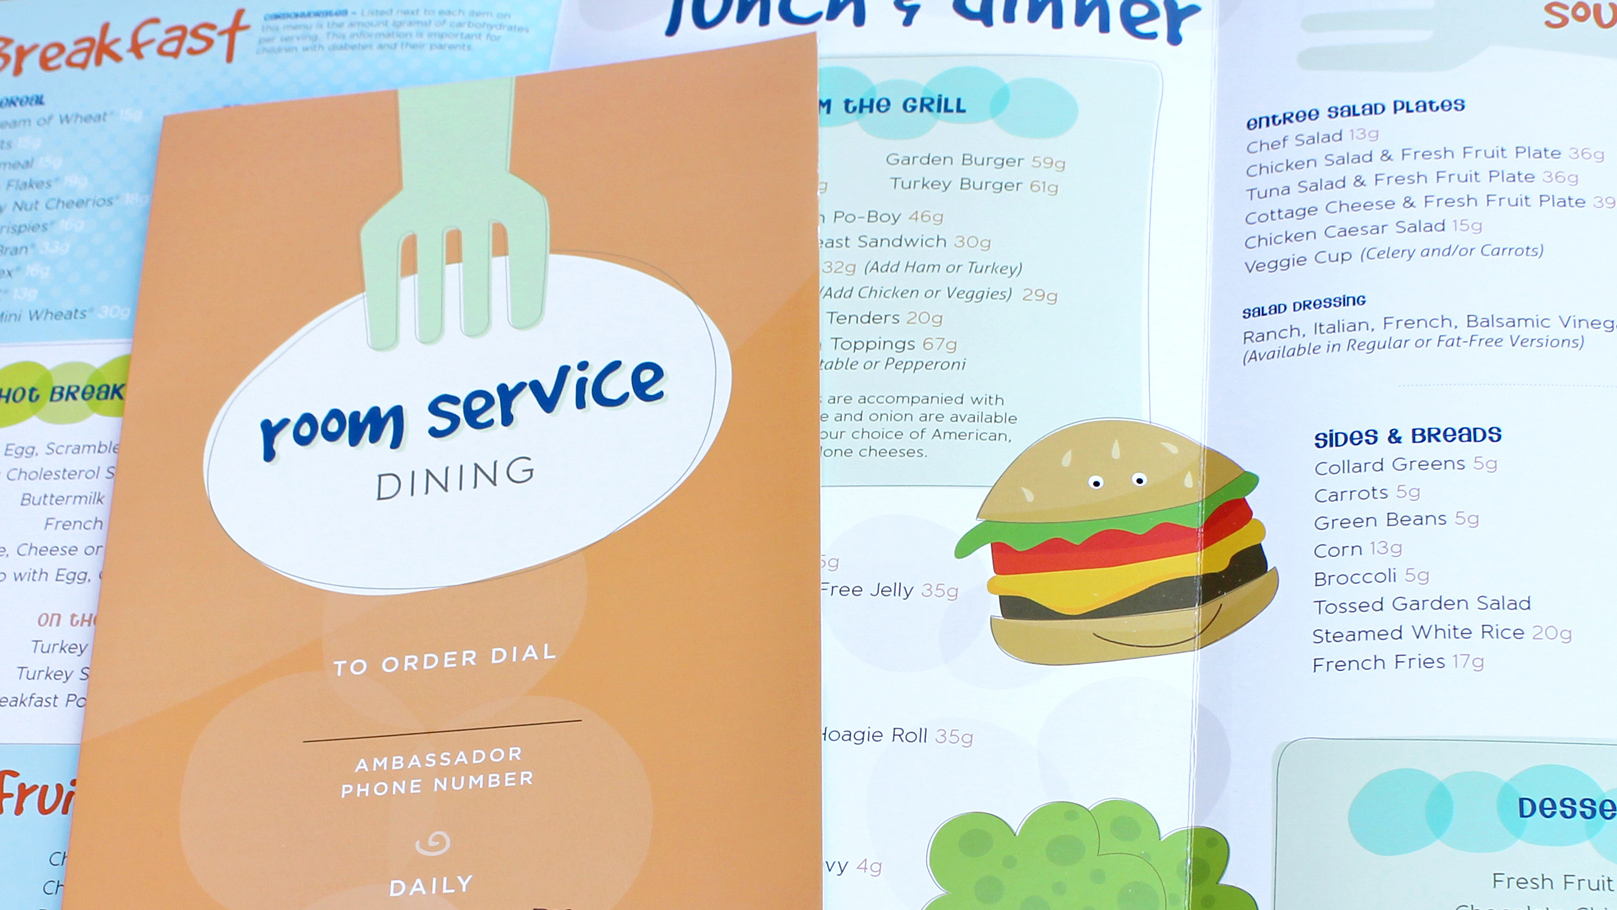 Our Lady of the Lake Children's Hospital Room Service Menu